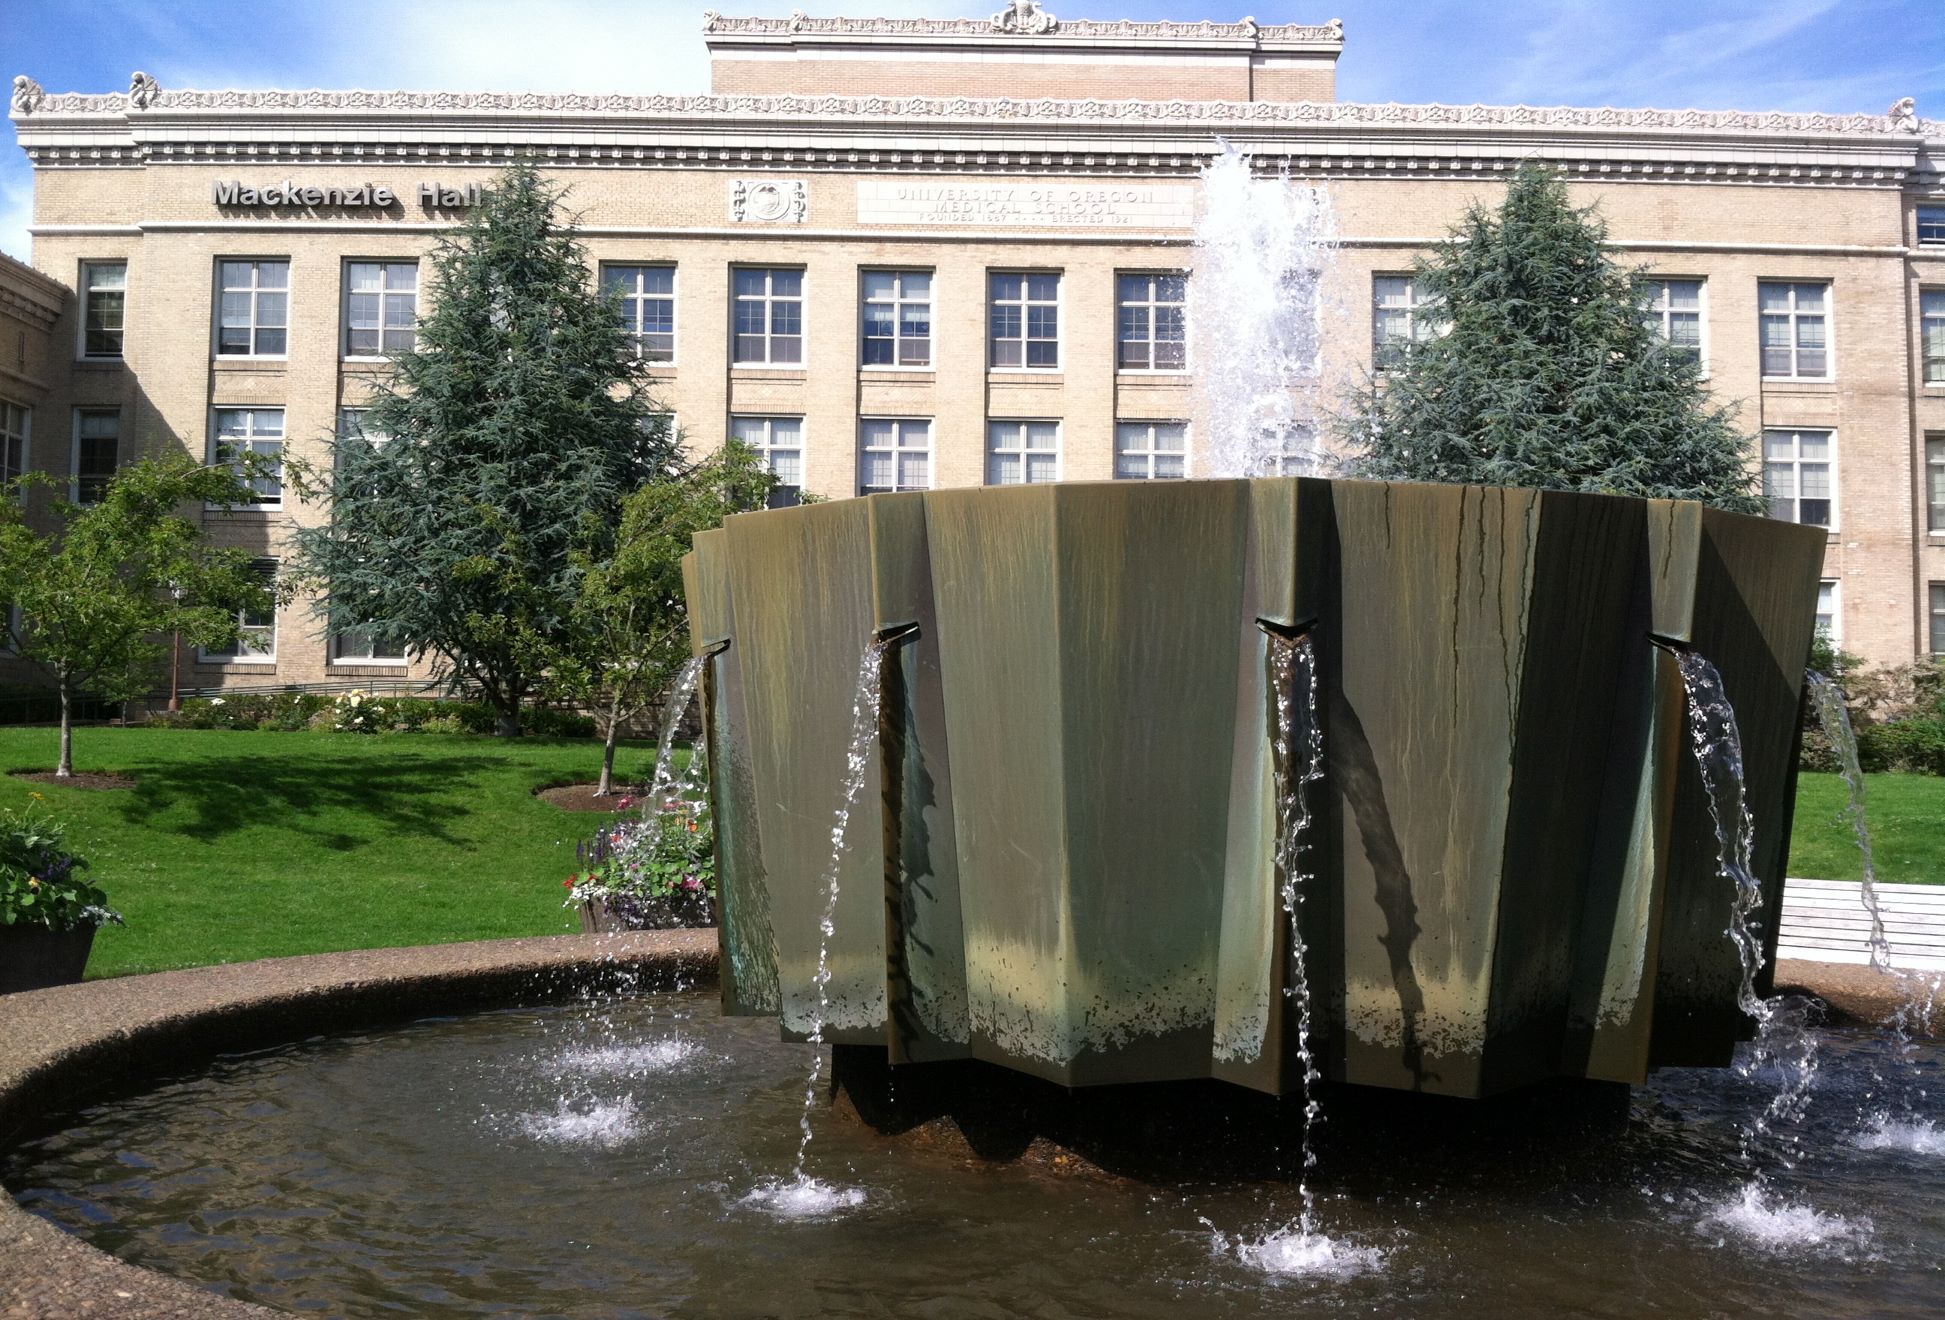 Fountain in front of Mackenzie Hall